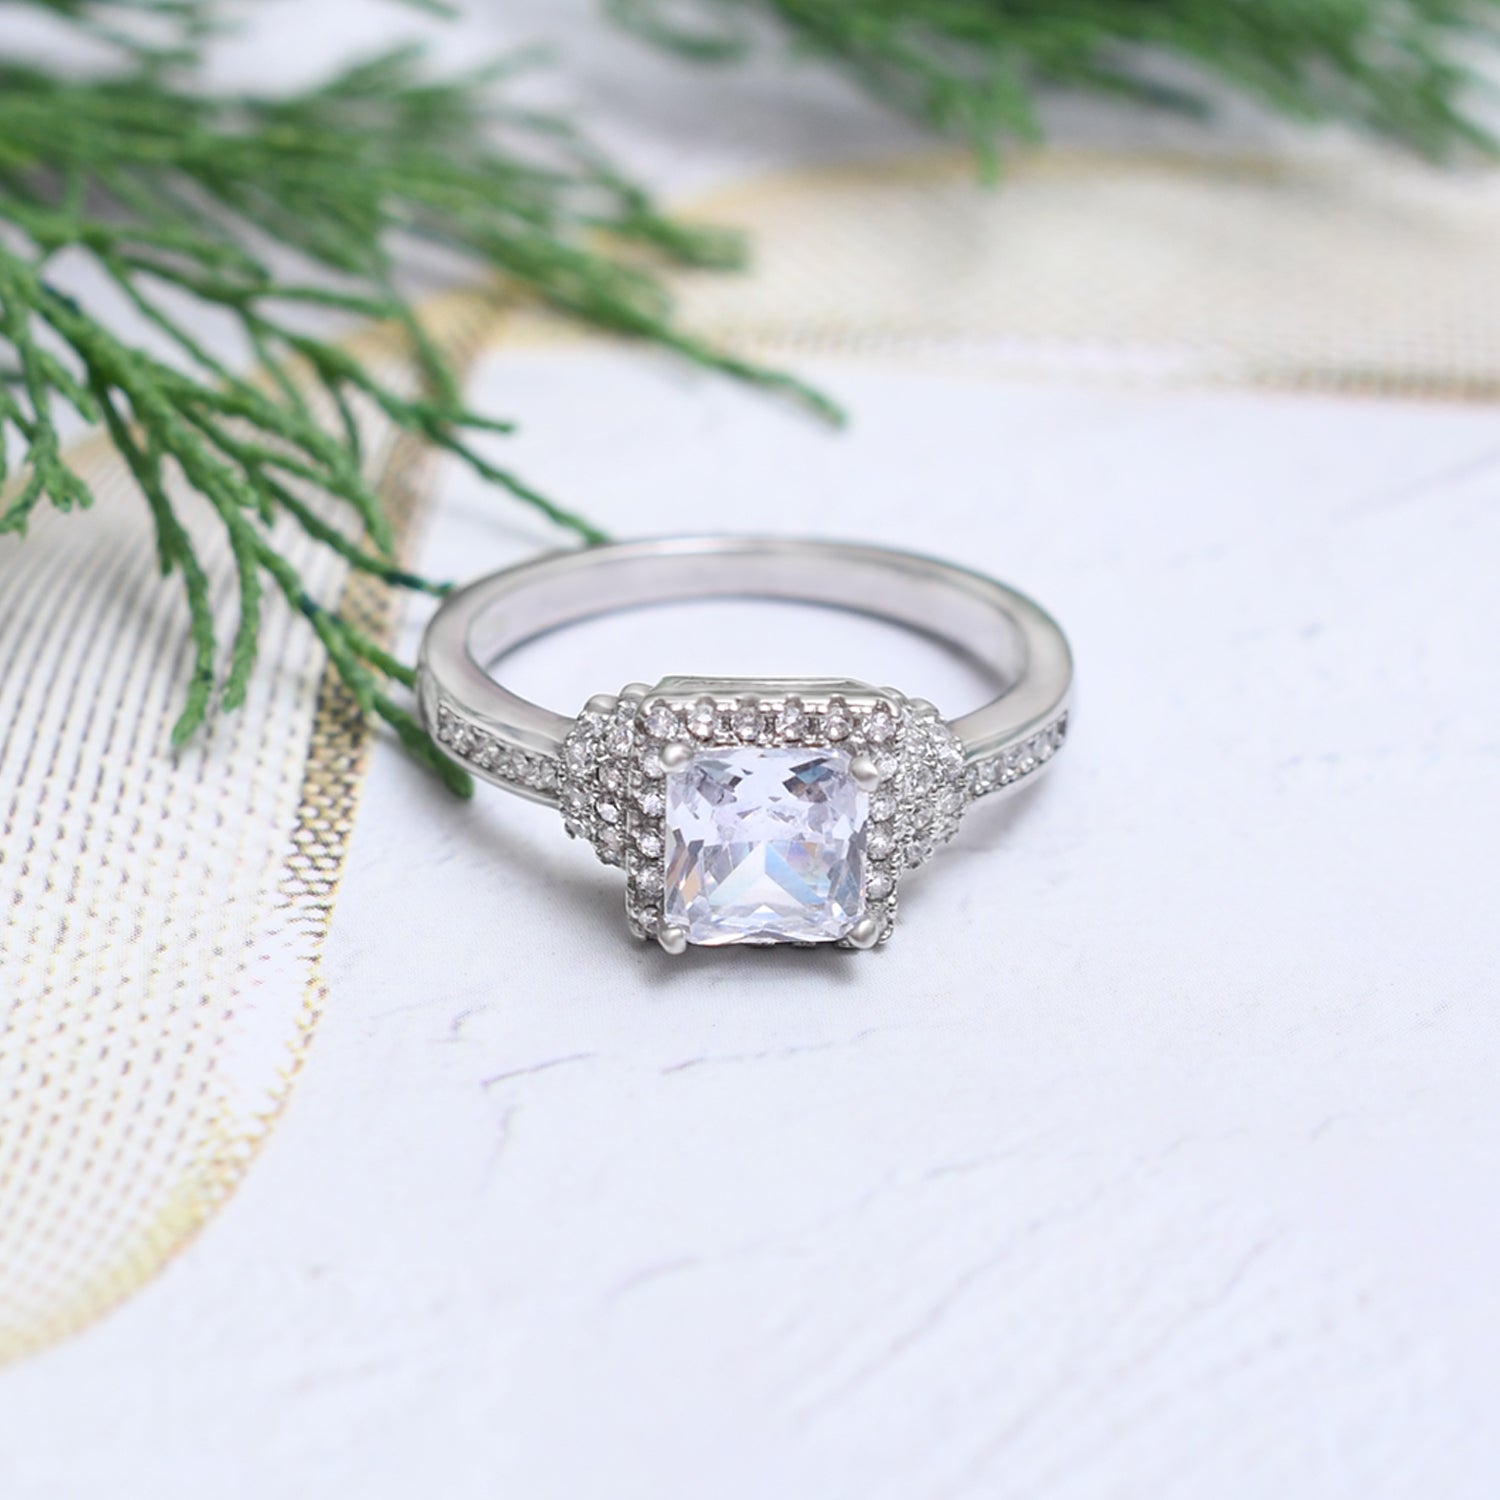 Silver Sparkling Square Solitaire Ring